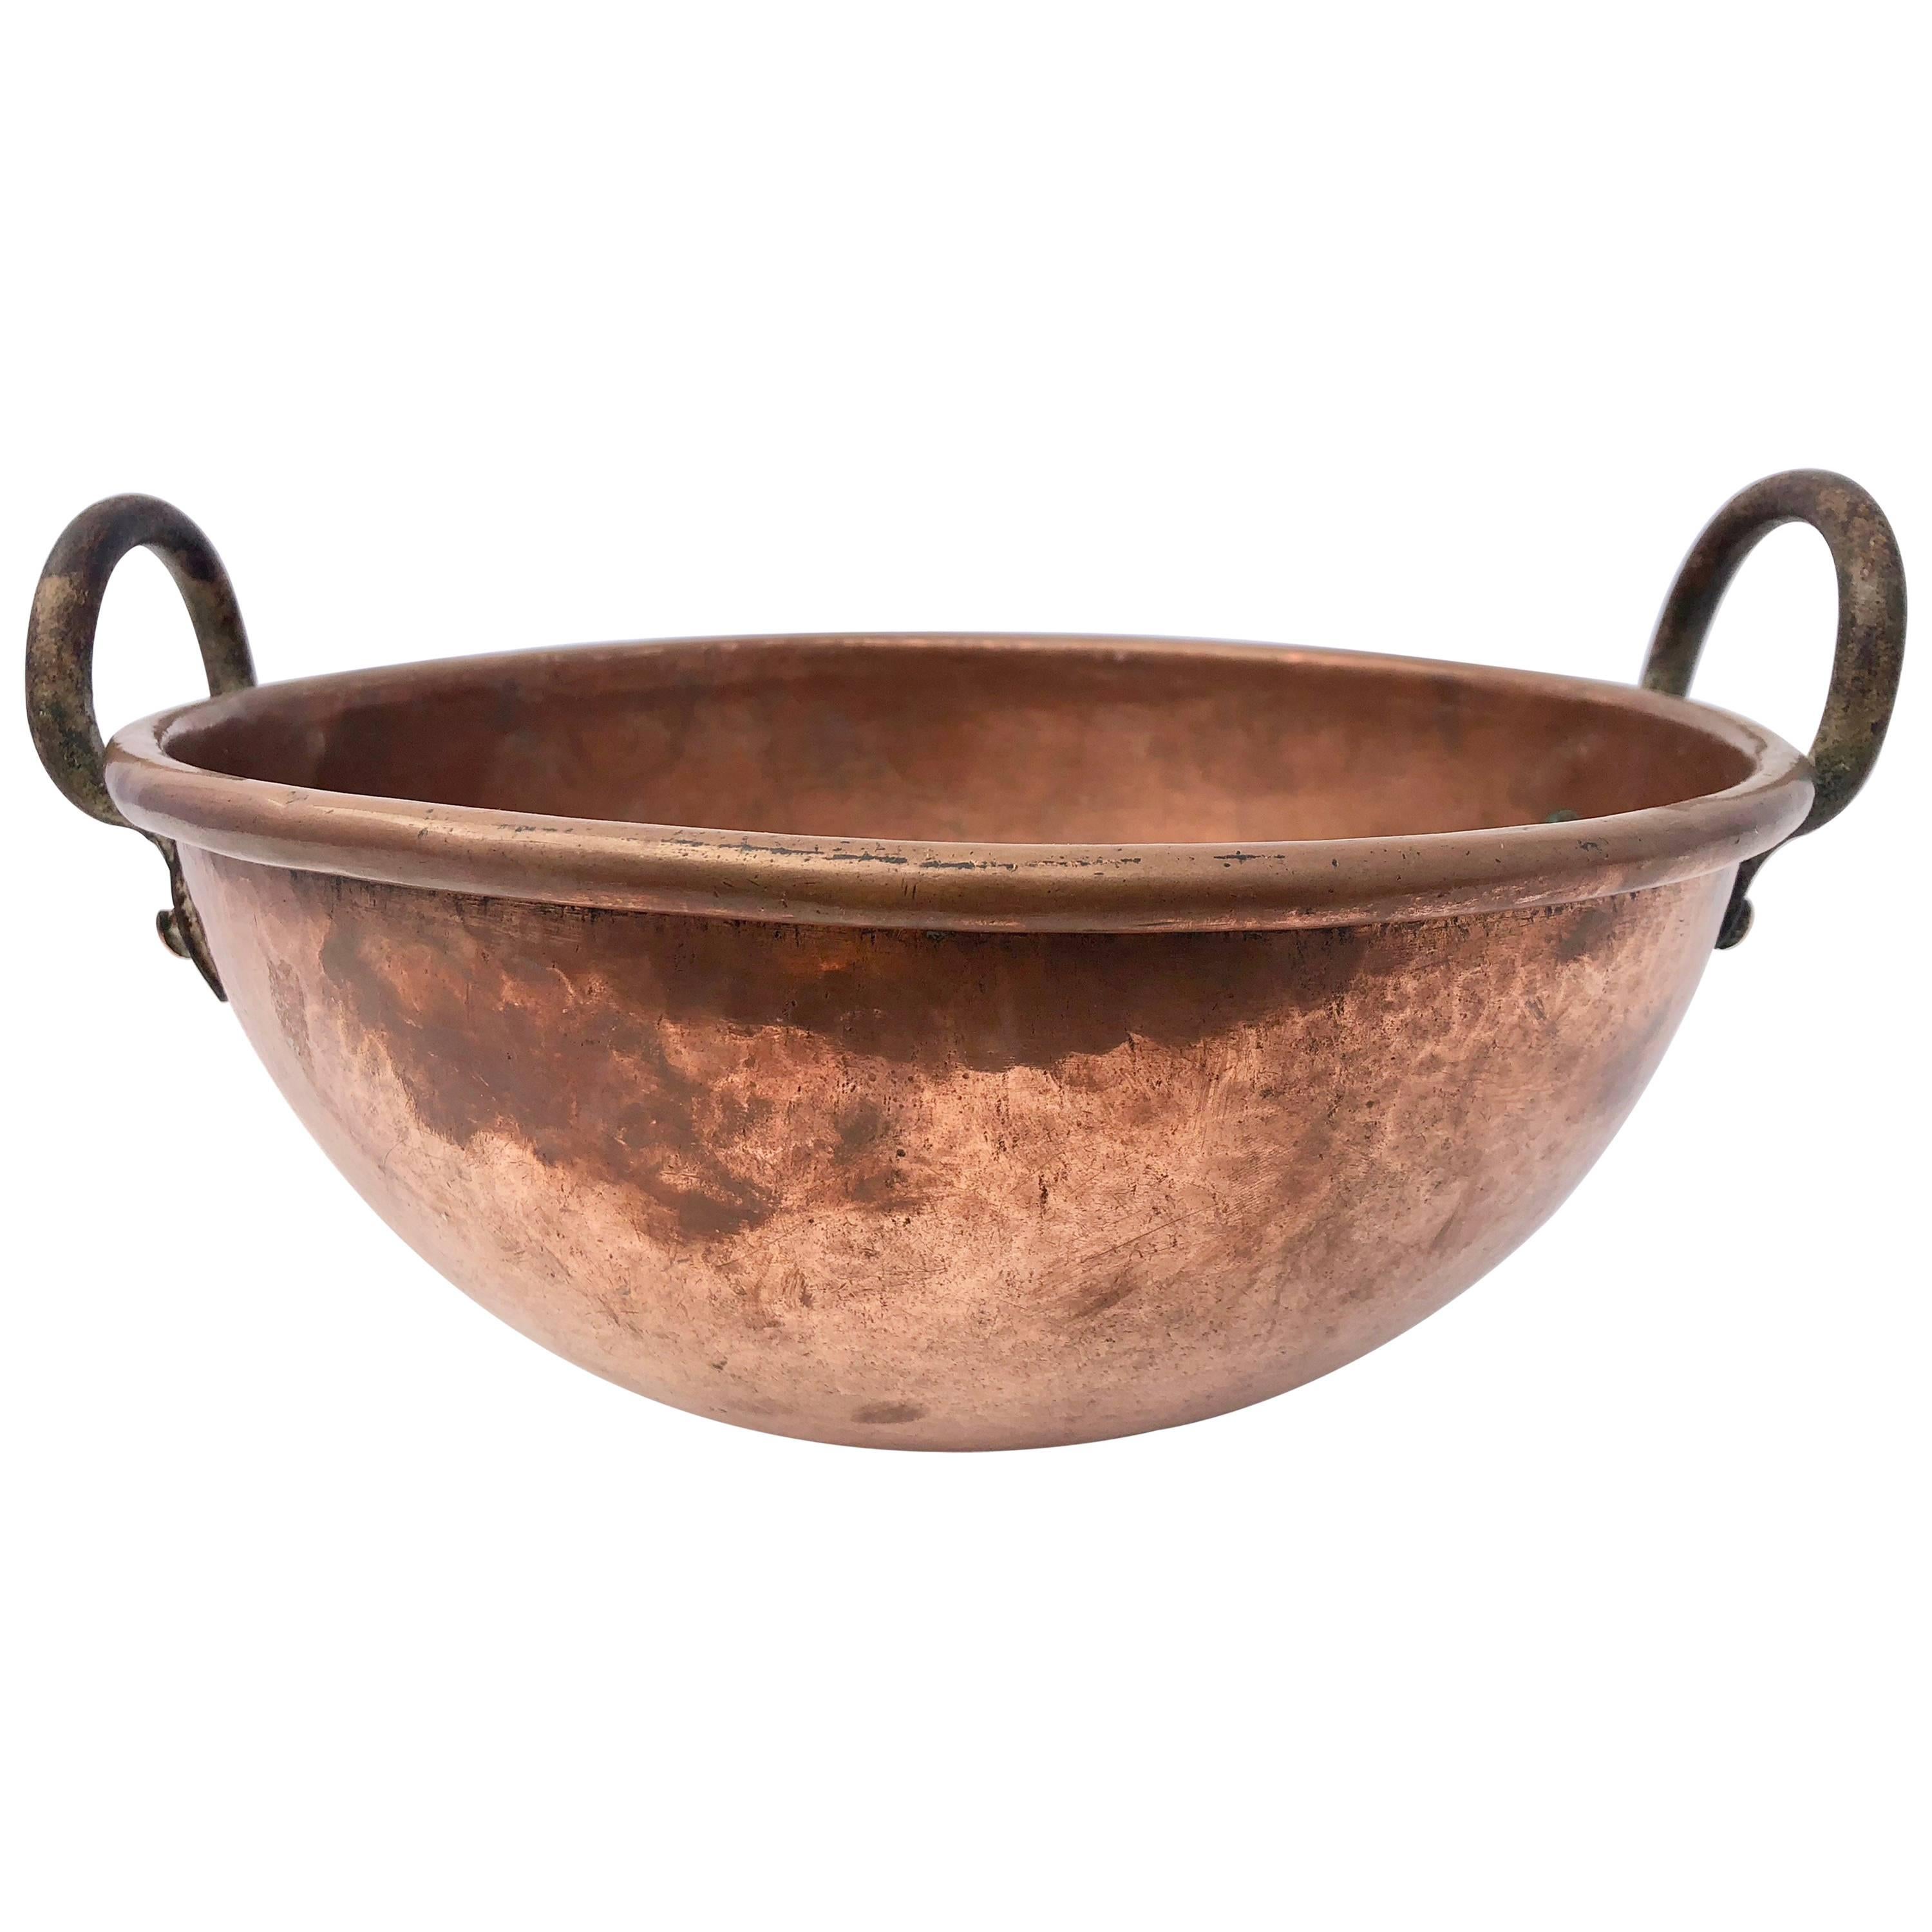 French Antique Copper Preserving Pan "Cul De Poule" with Wrought Iron Handles For Sale